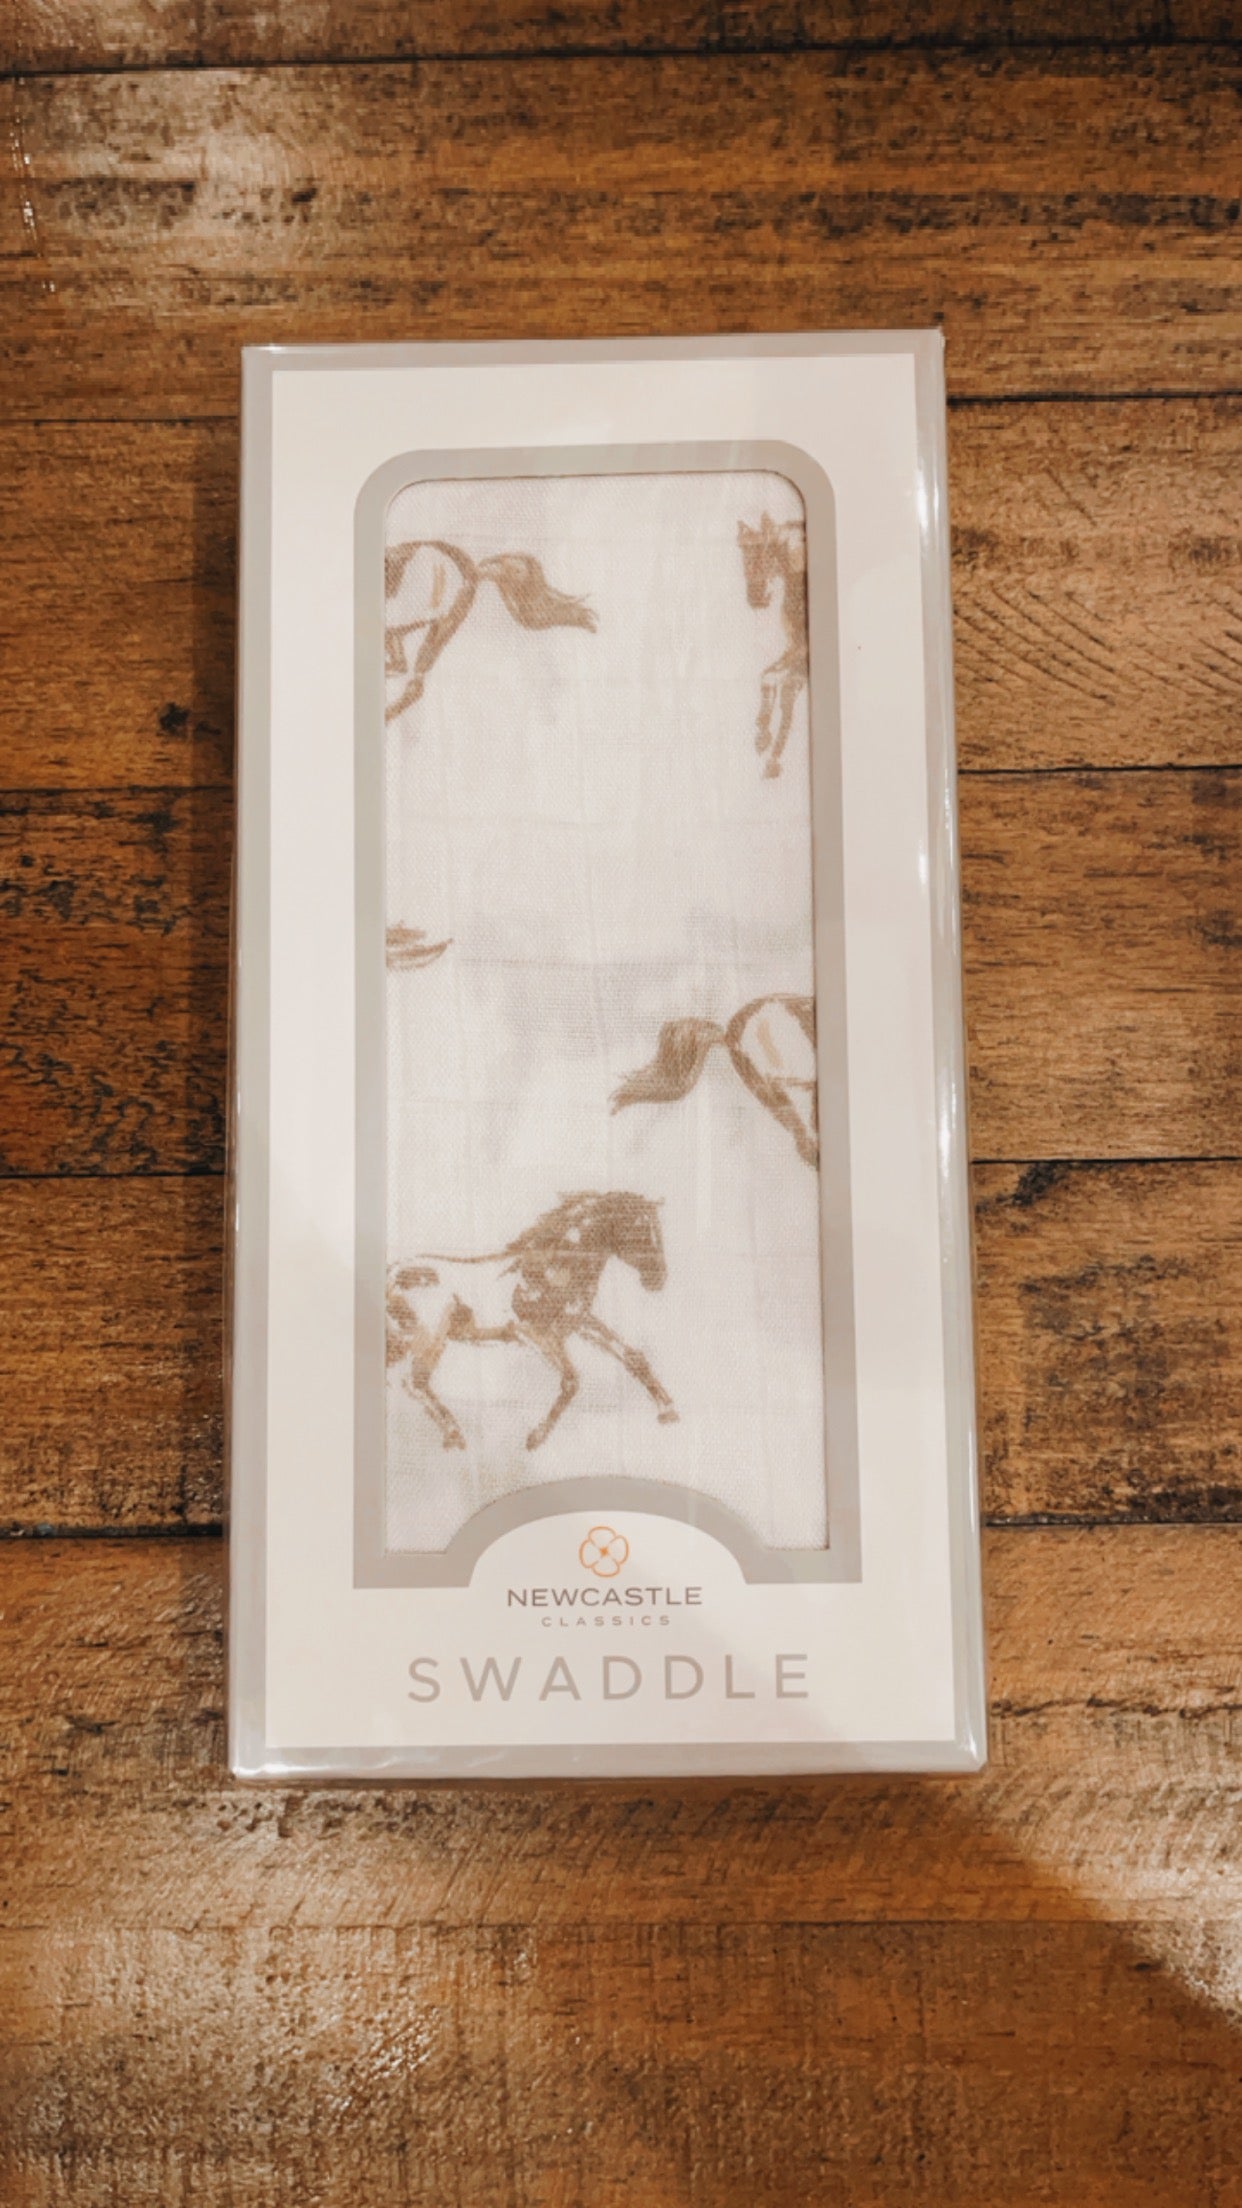 The Western Swaddles